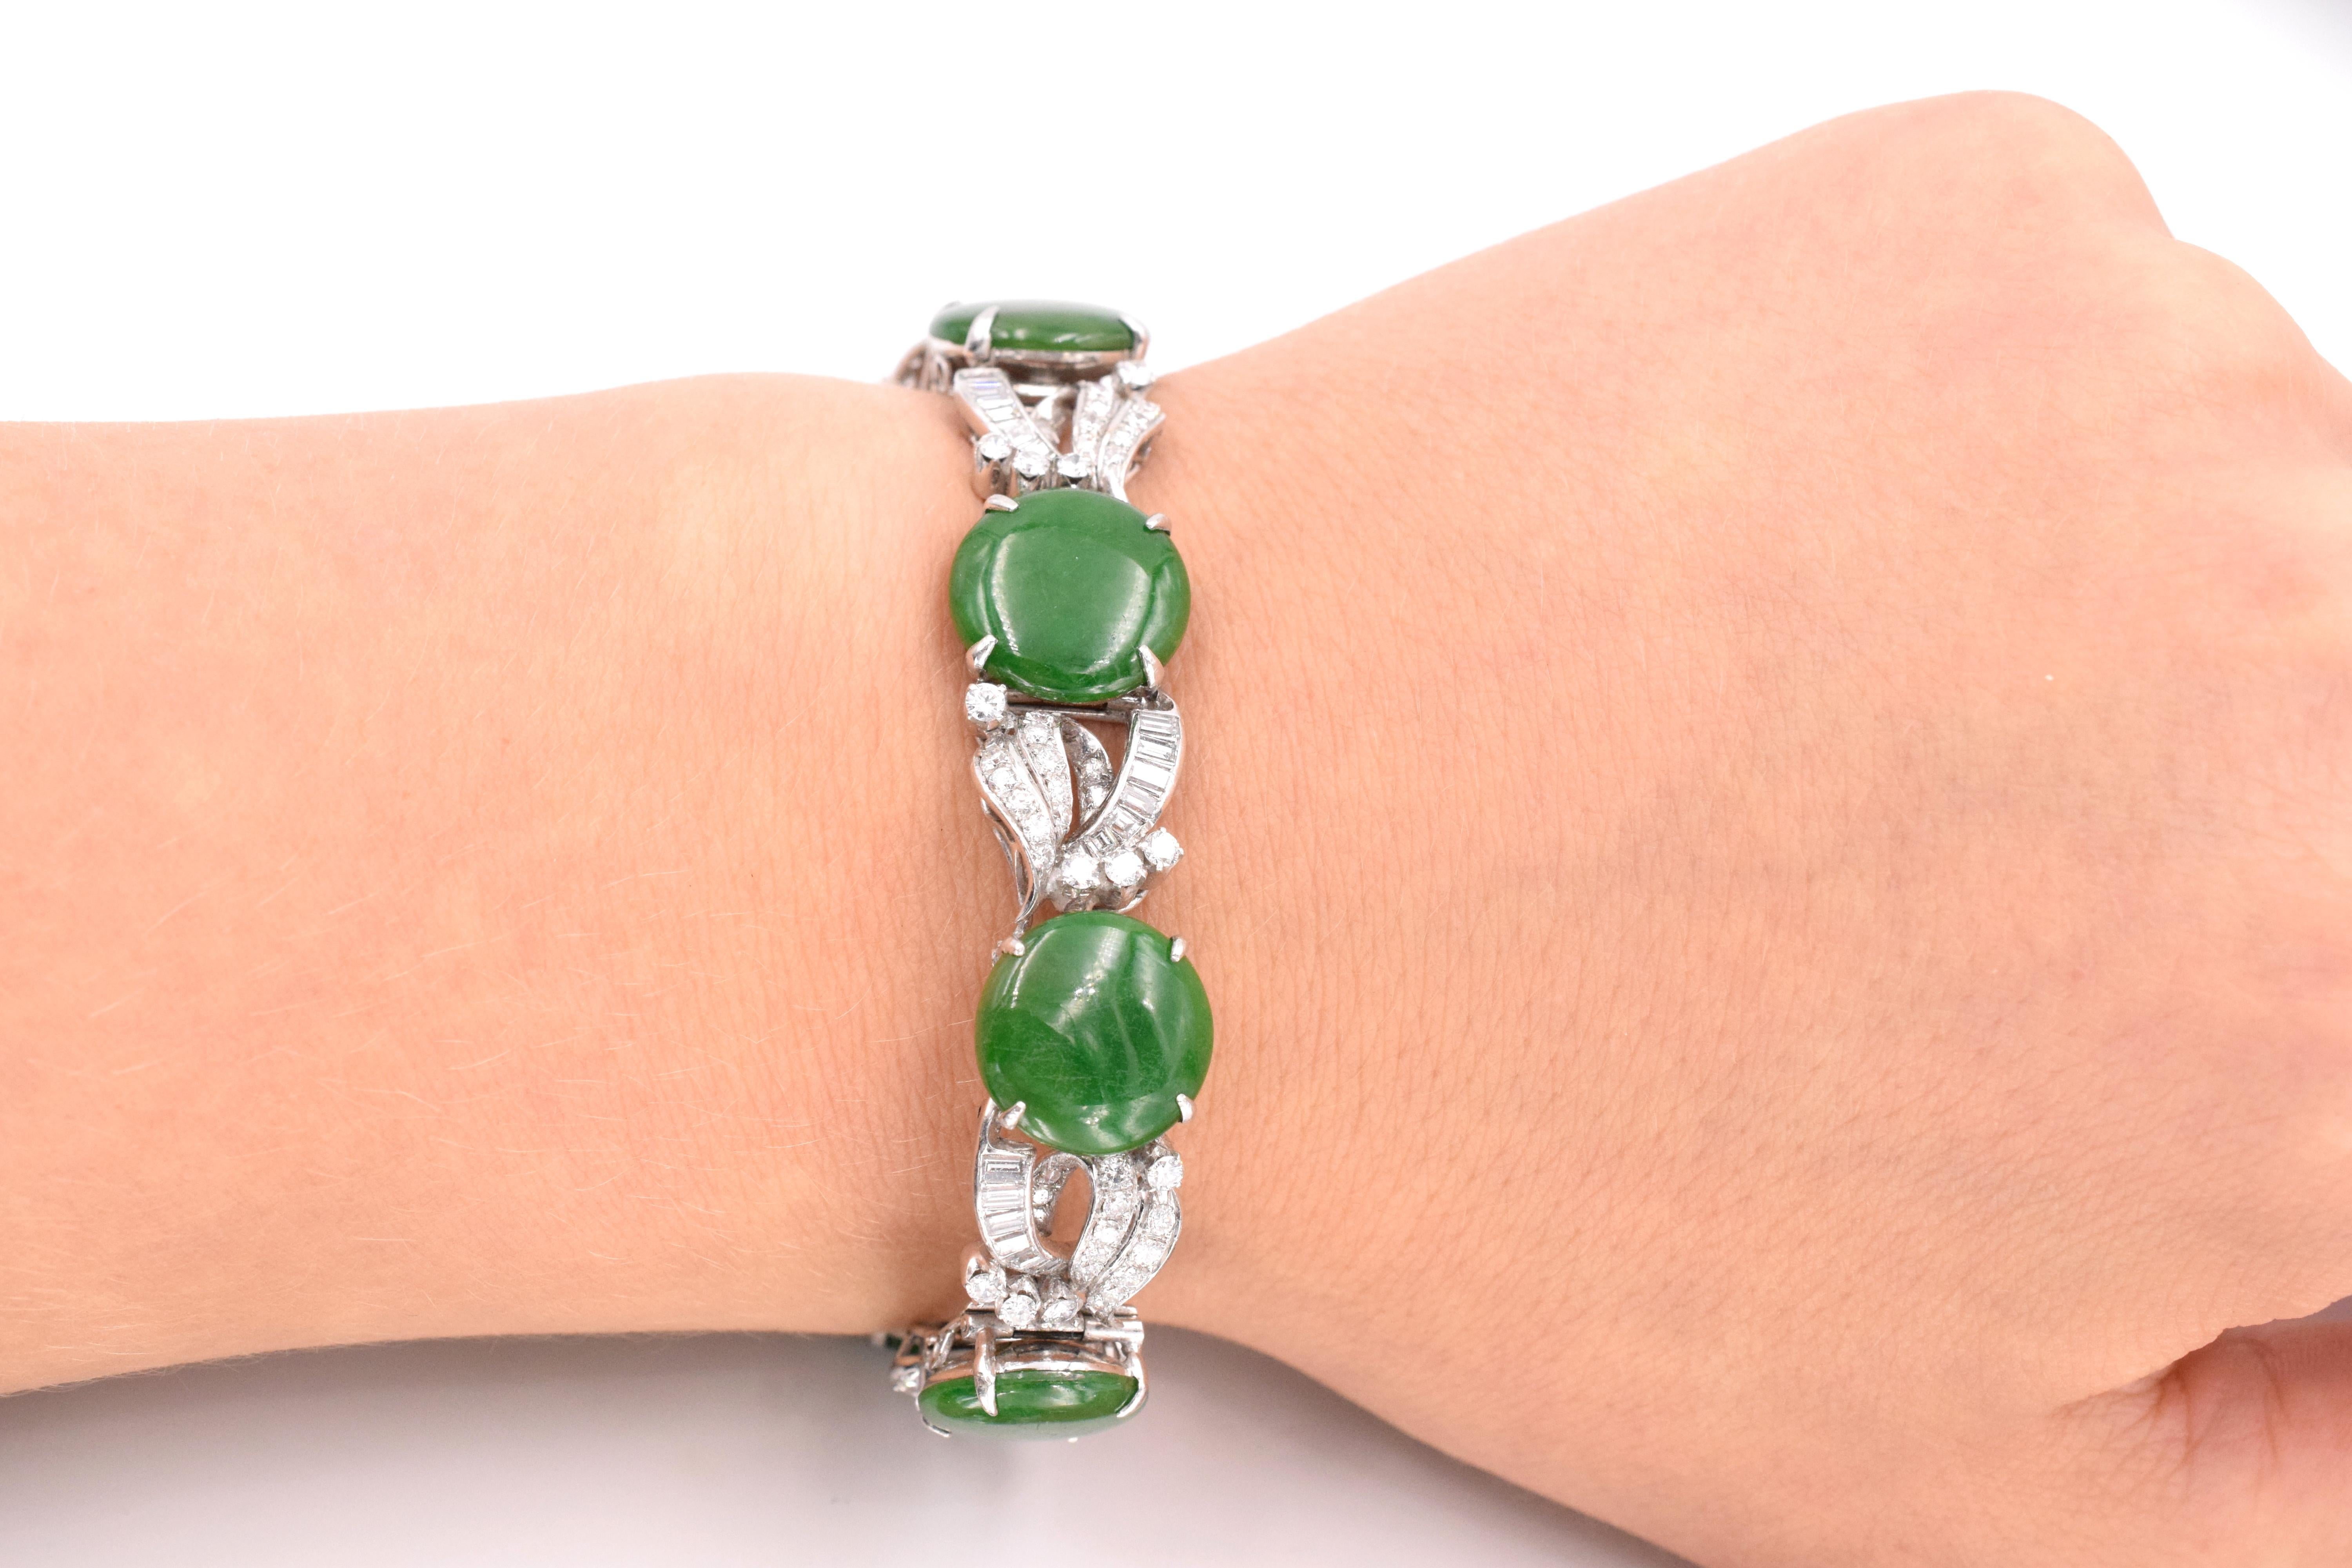 Timeless vintage jade and diamond bracelet!
beautiful green 6 disc shape jades separated by diamond links.
Total weight of jade is app. 35 carats
Total weight of diamonds is: 6 carats 
Diamonds are set in platinum
Bracelet length is 7.5 inches
Width